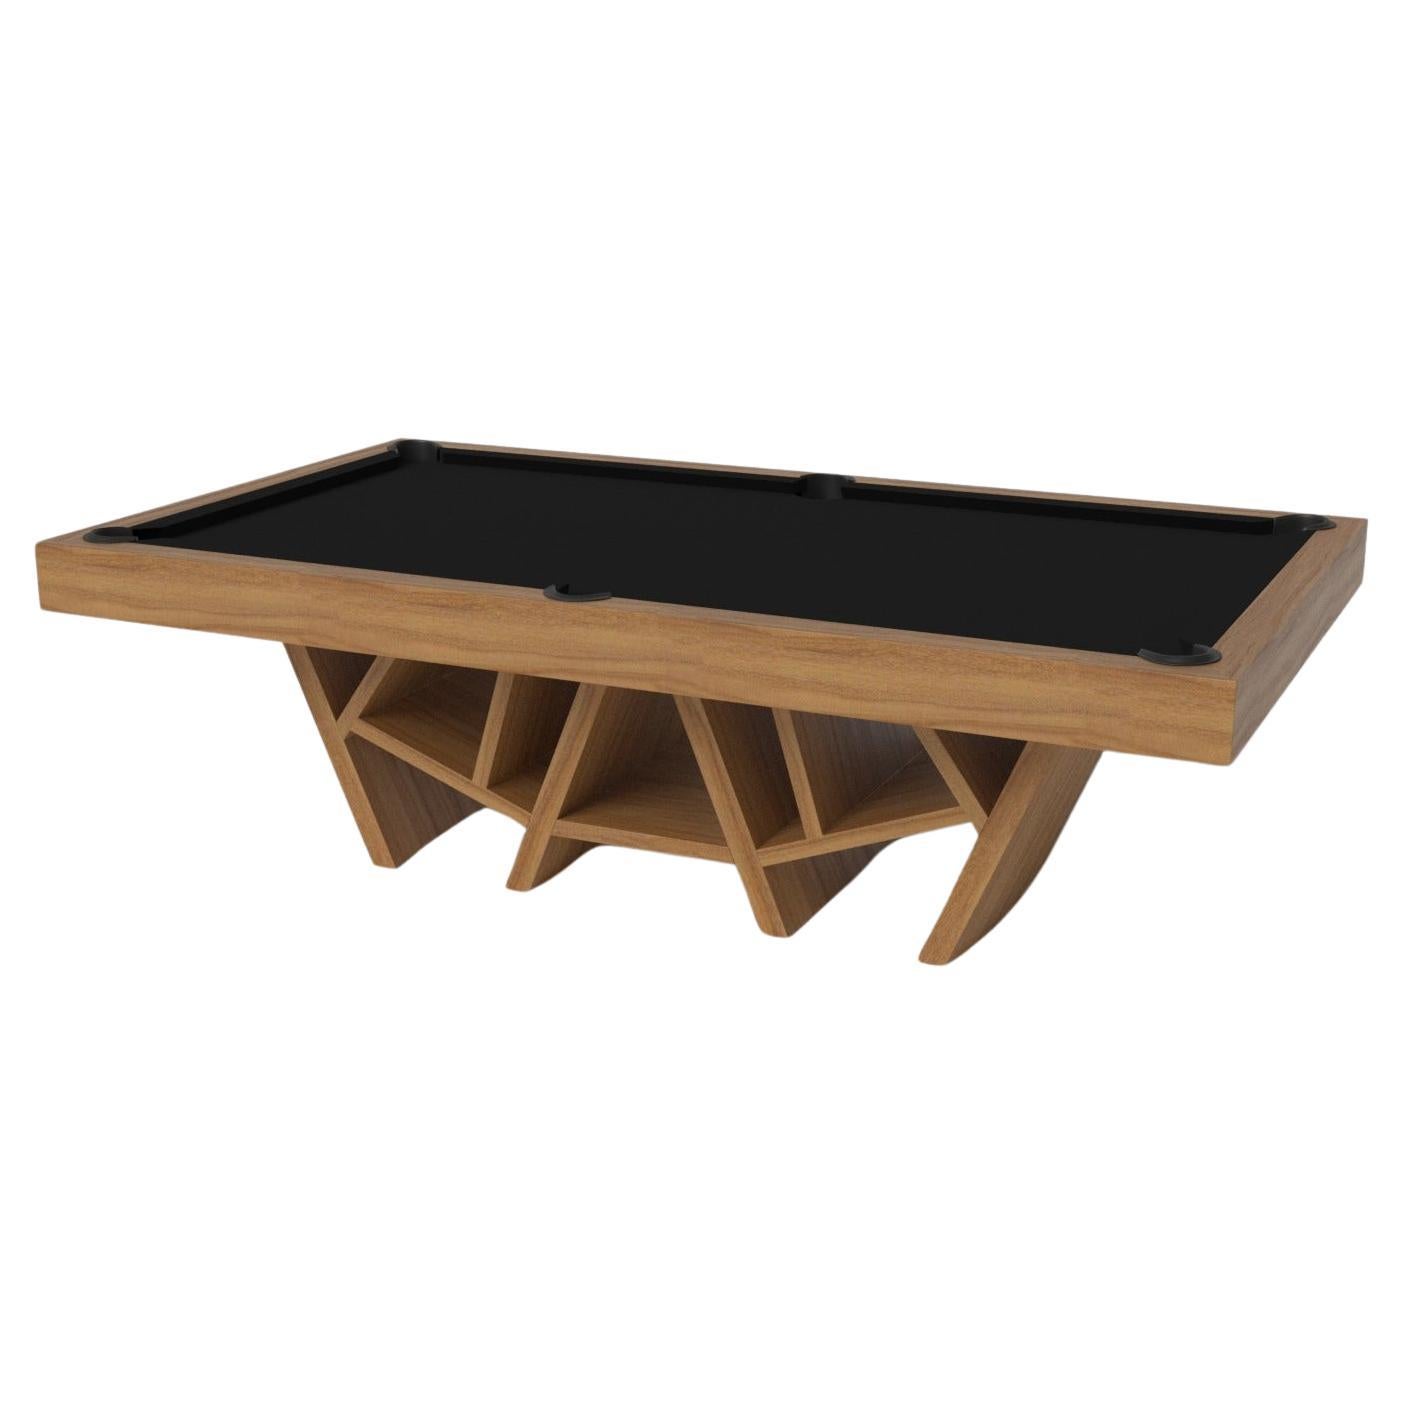 Elevate Customs Maze Pool Table / Solid Teak Wood in 8.5' - Made in USA